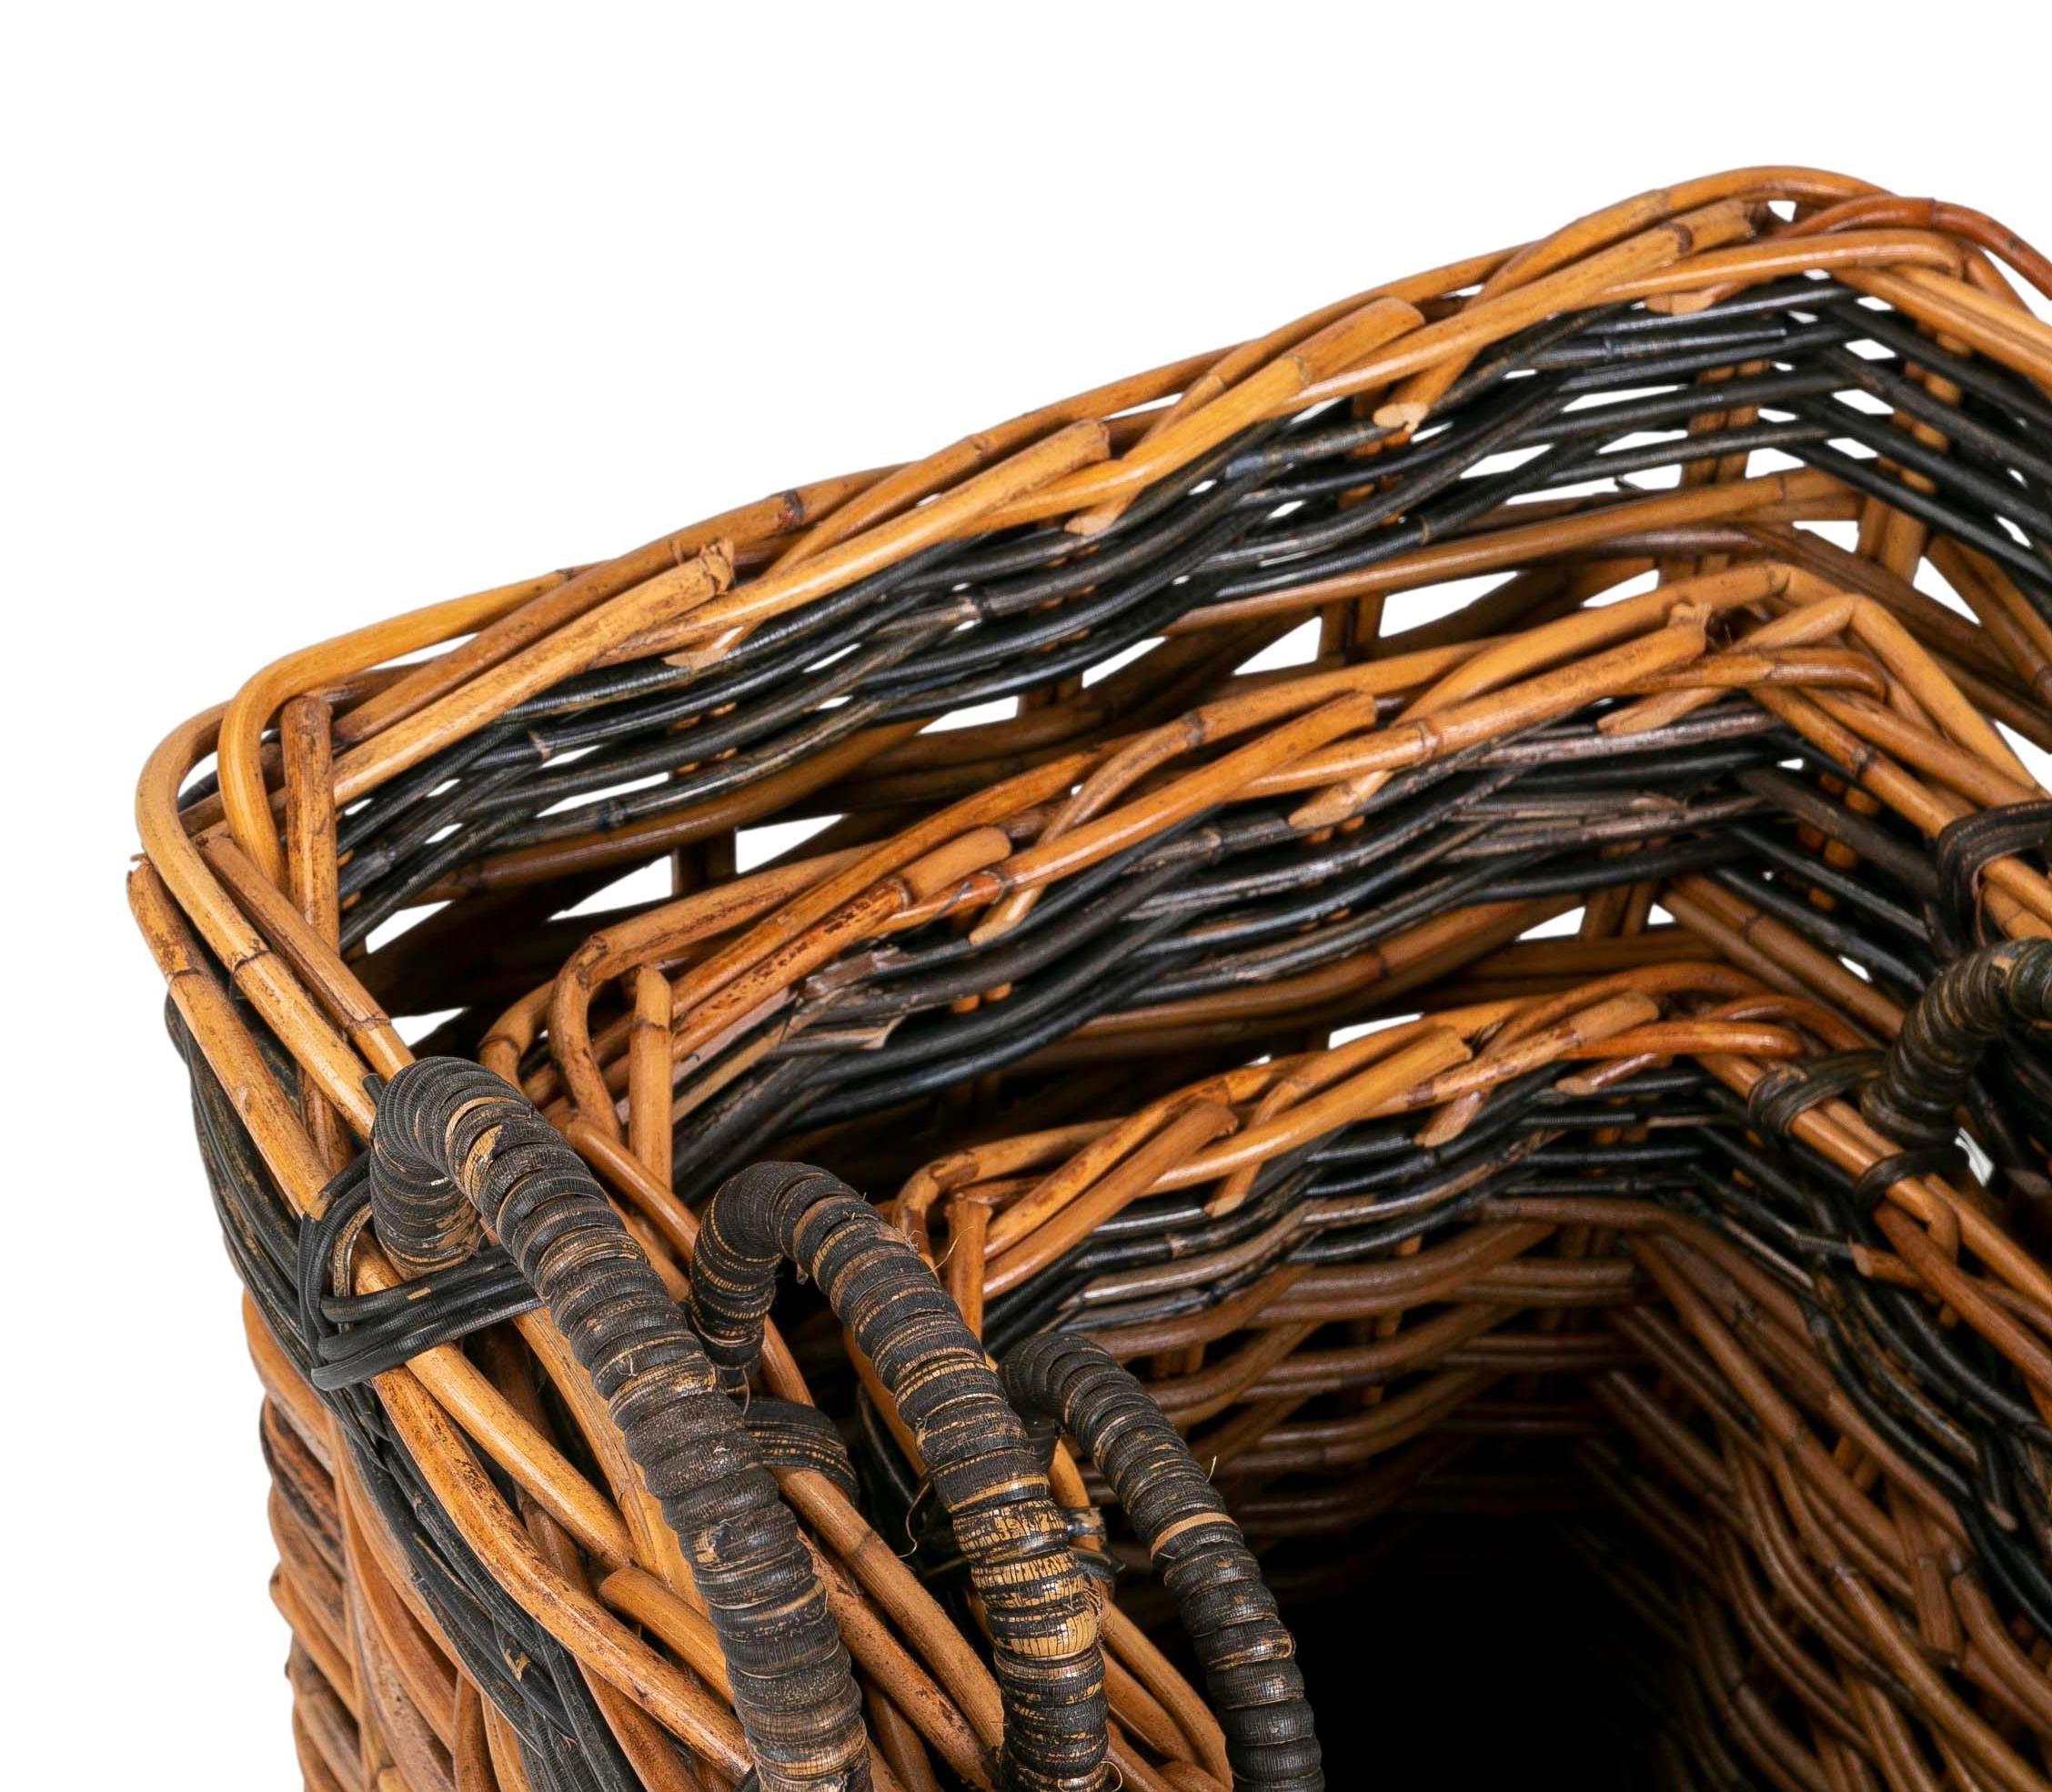 Set Consisting of Three Handmade Wicker Baskets For Sale 12